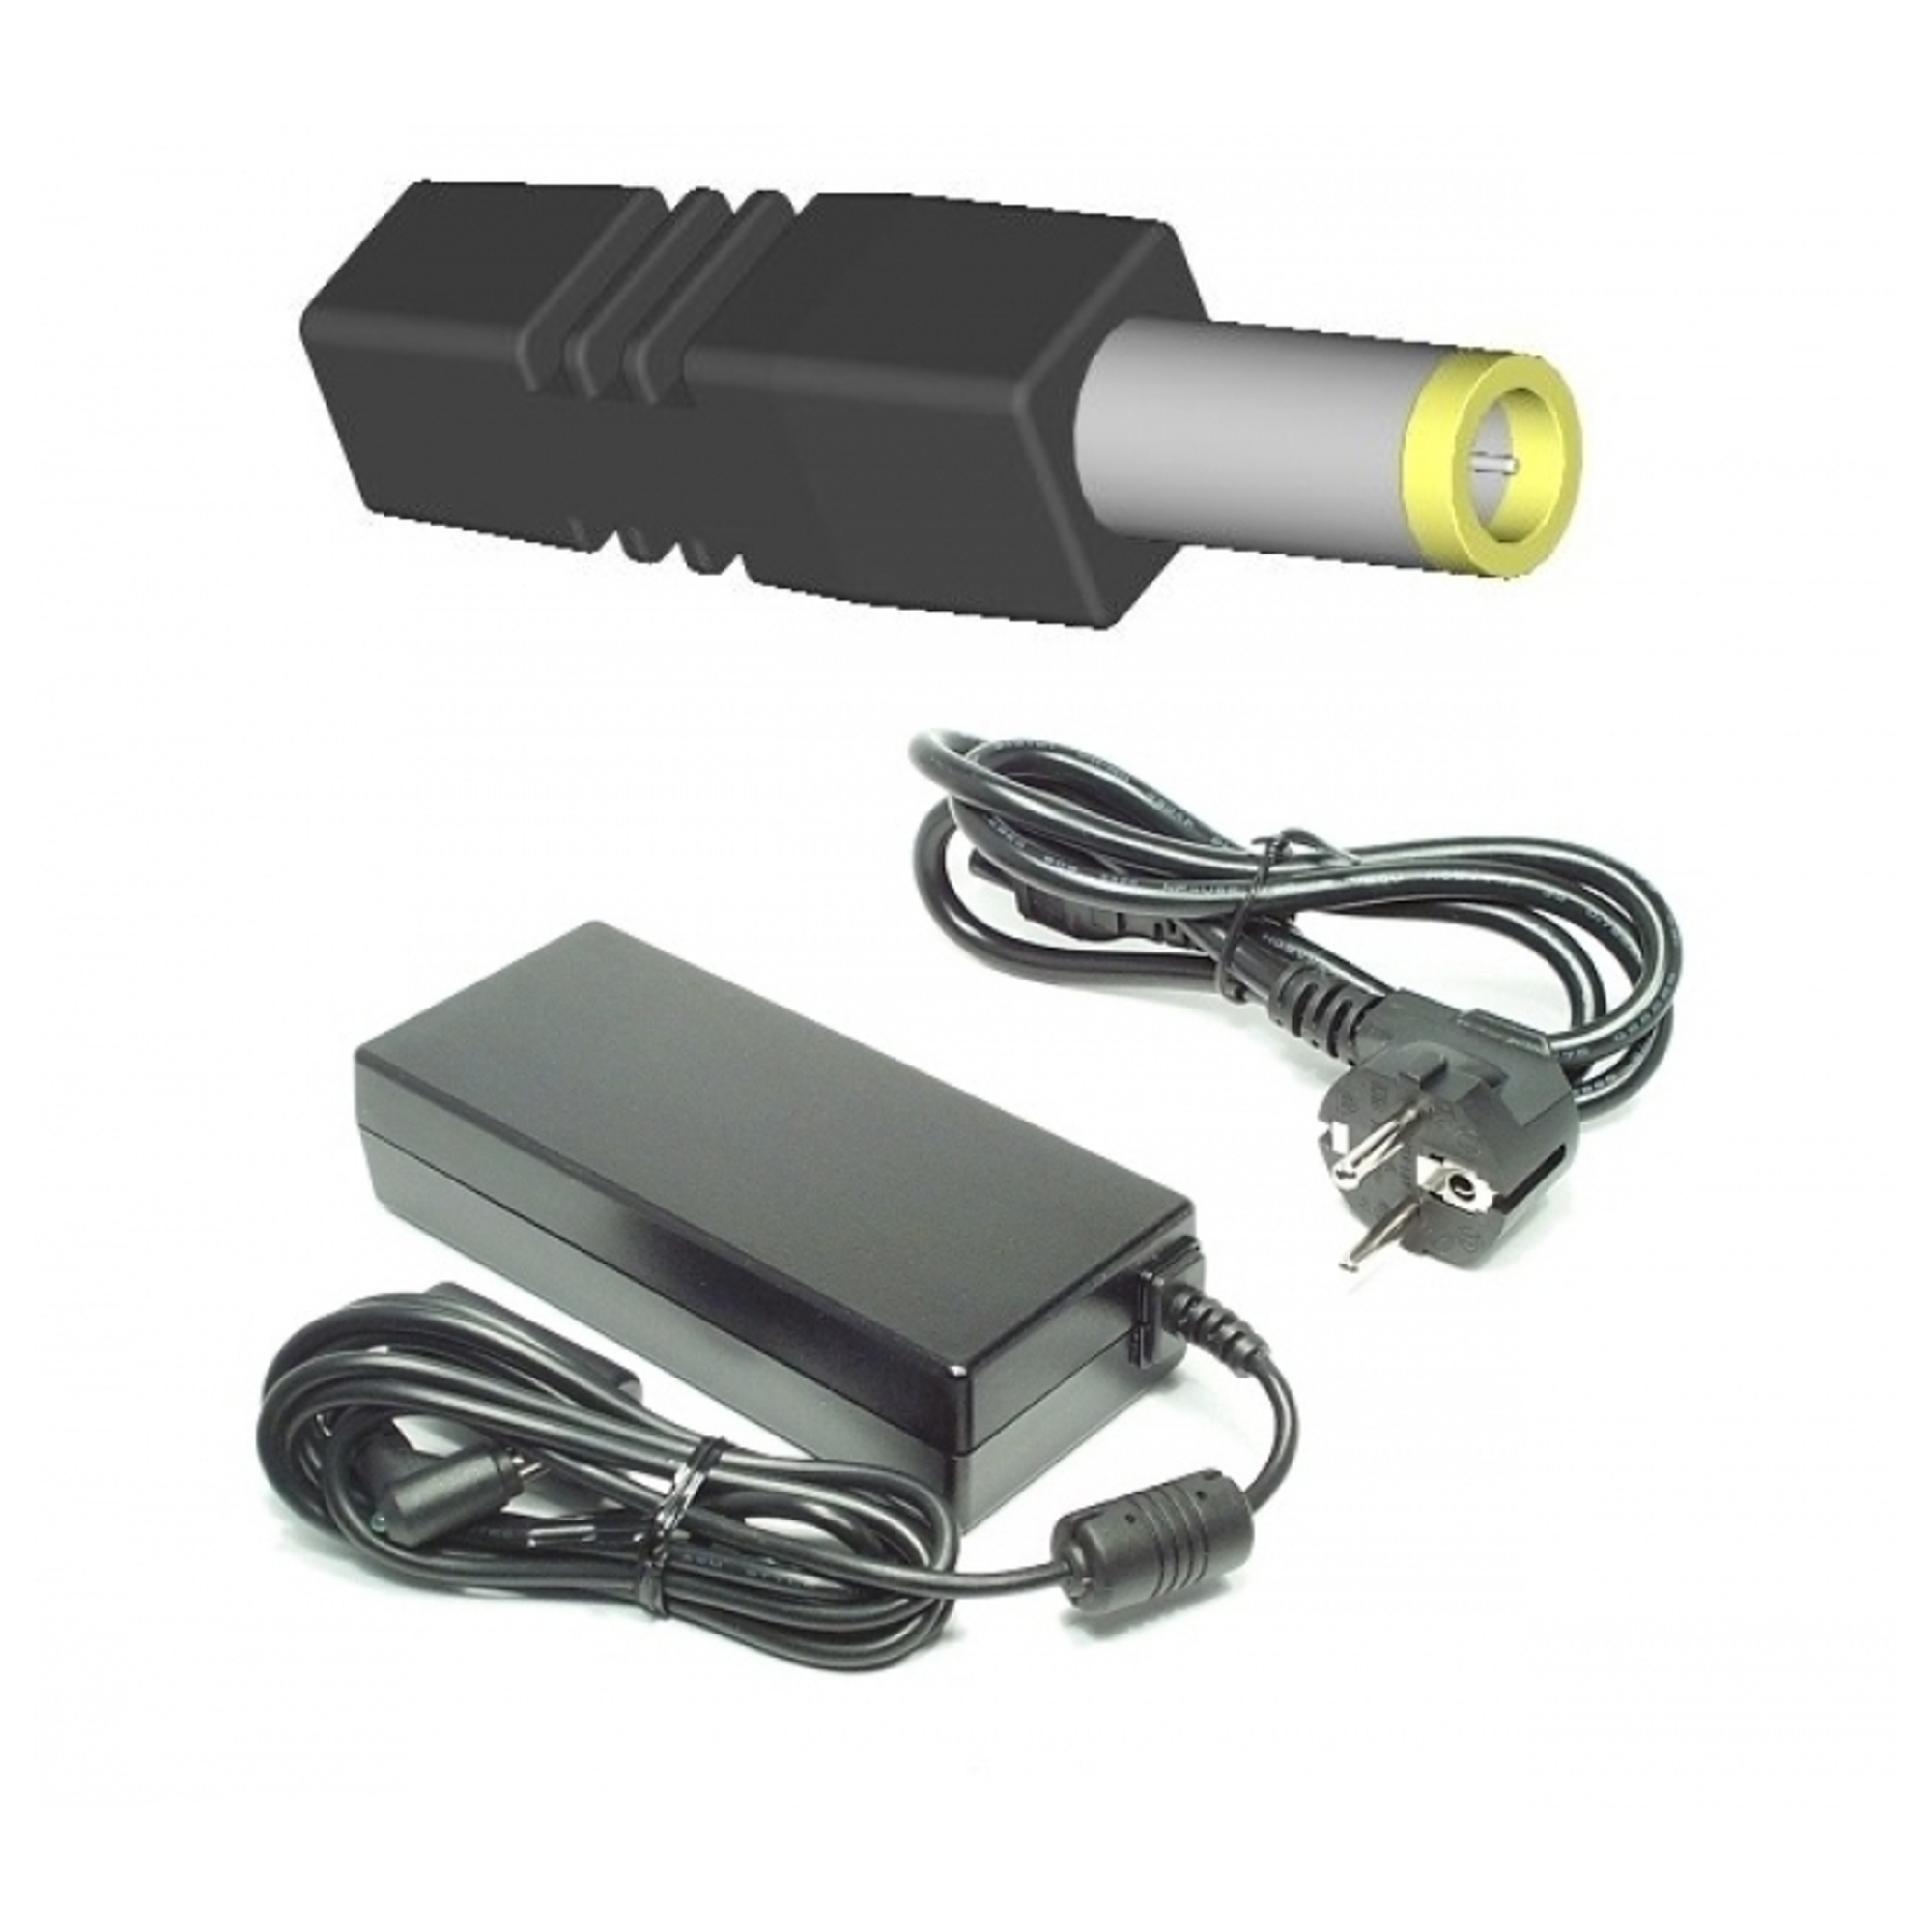 microbattery charger (power supply), 19.5v, 6.7a for dell latitude e6540, 130w, connector 7.4 x 5.5 mm round - neuf